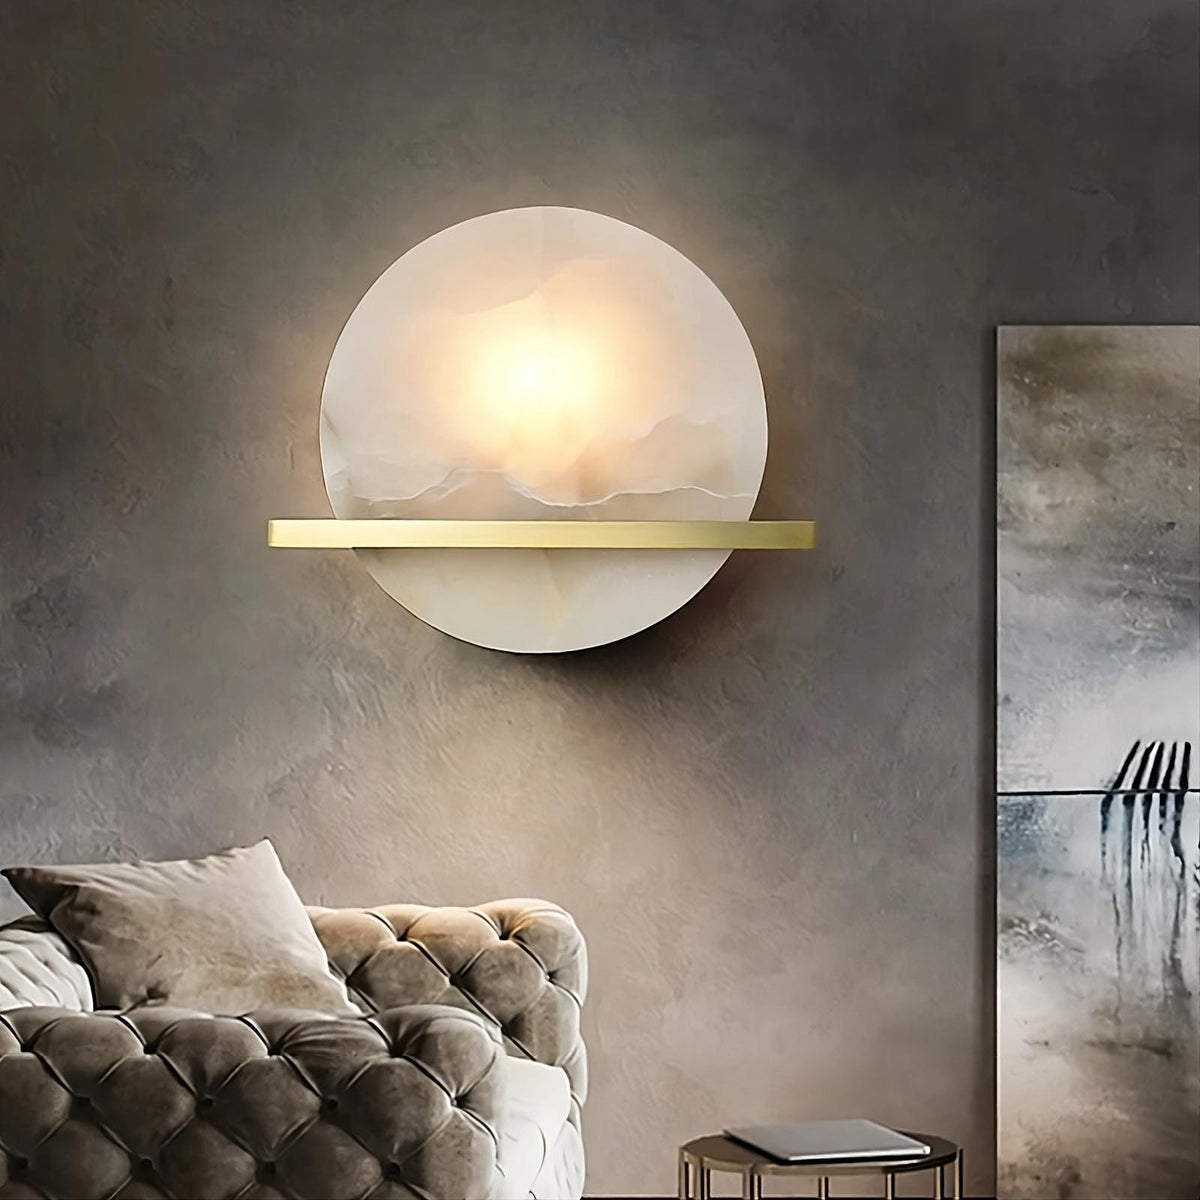 A modern, elegant living room features the Natural Marble Wall Light Sconce by Morsale.com with an LED light source, emitting a diffuse glow, and a minimalist golden horizontal bar. Below is a tufted beige sofa, and next to it, a small round side table. A piece of abstract art hangs on the adjacent wall.